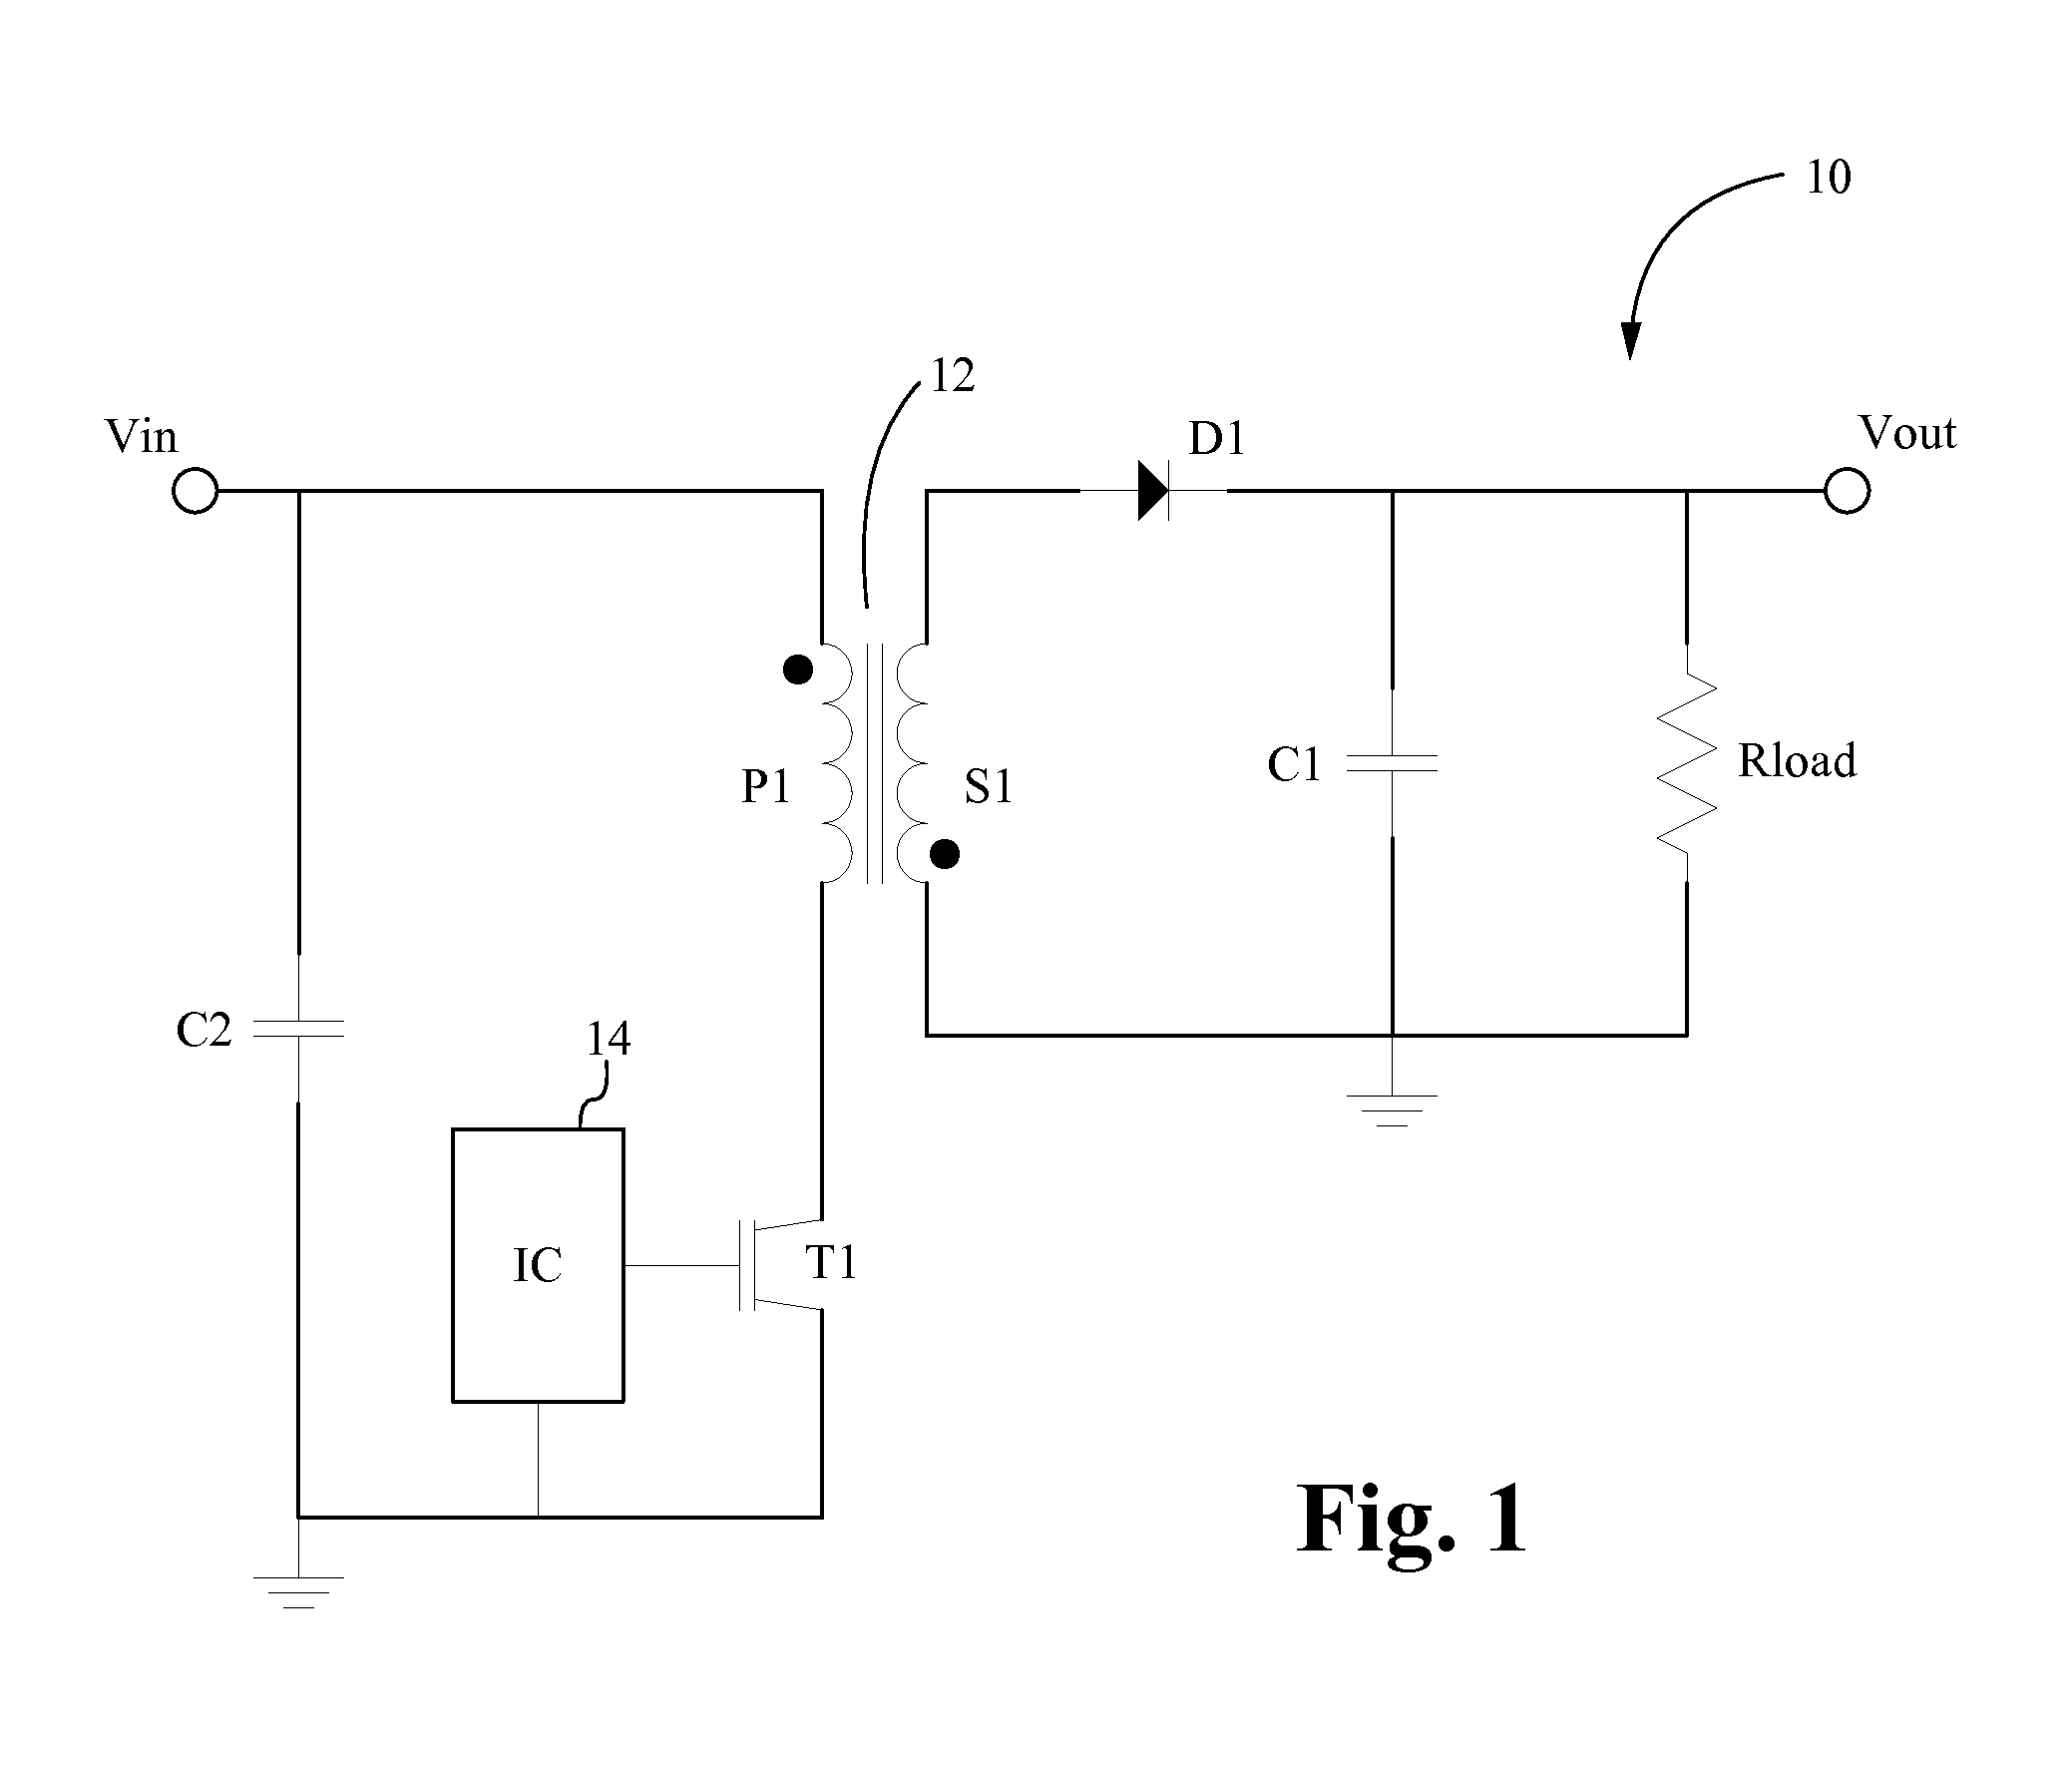 Control method to reduce switching loss on MOSFET